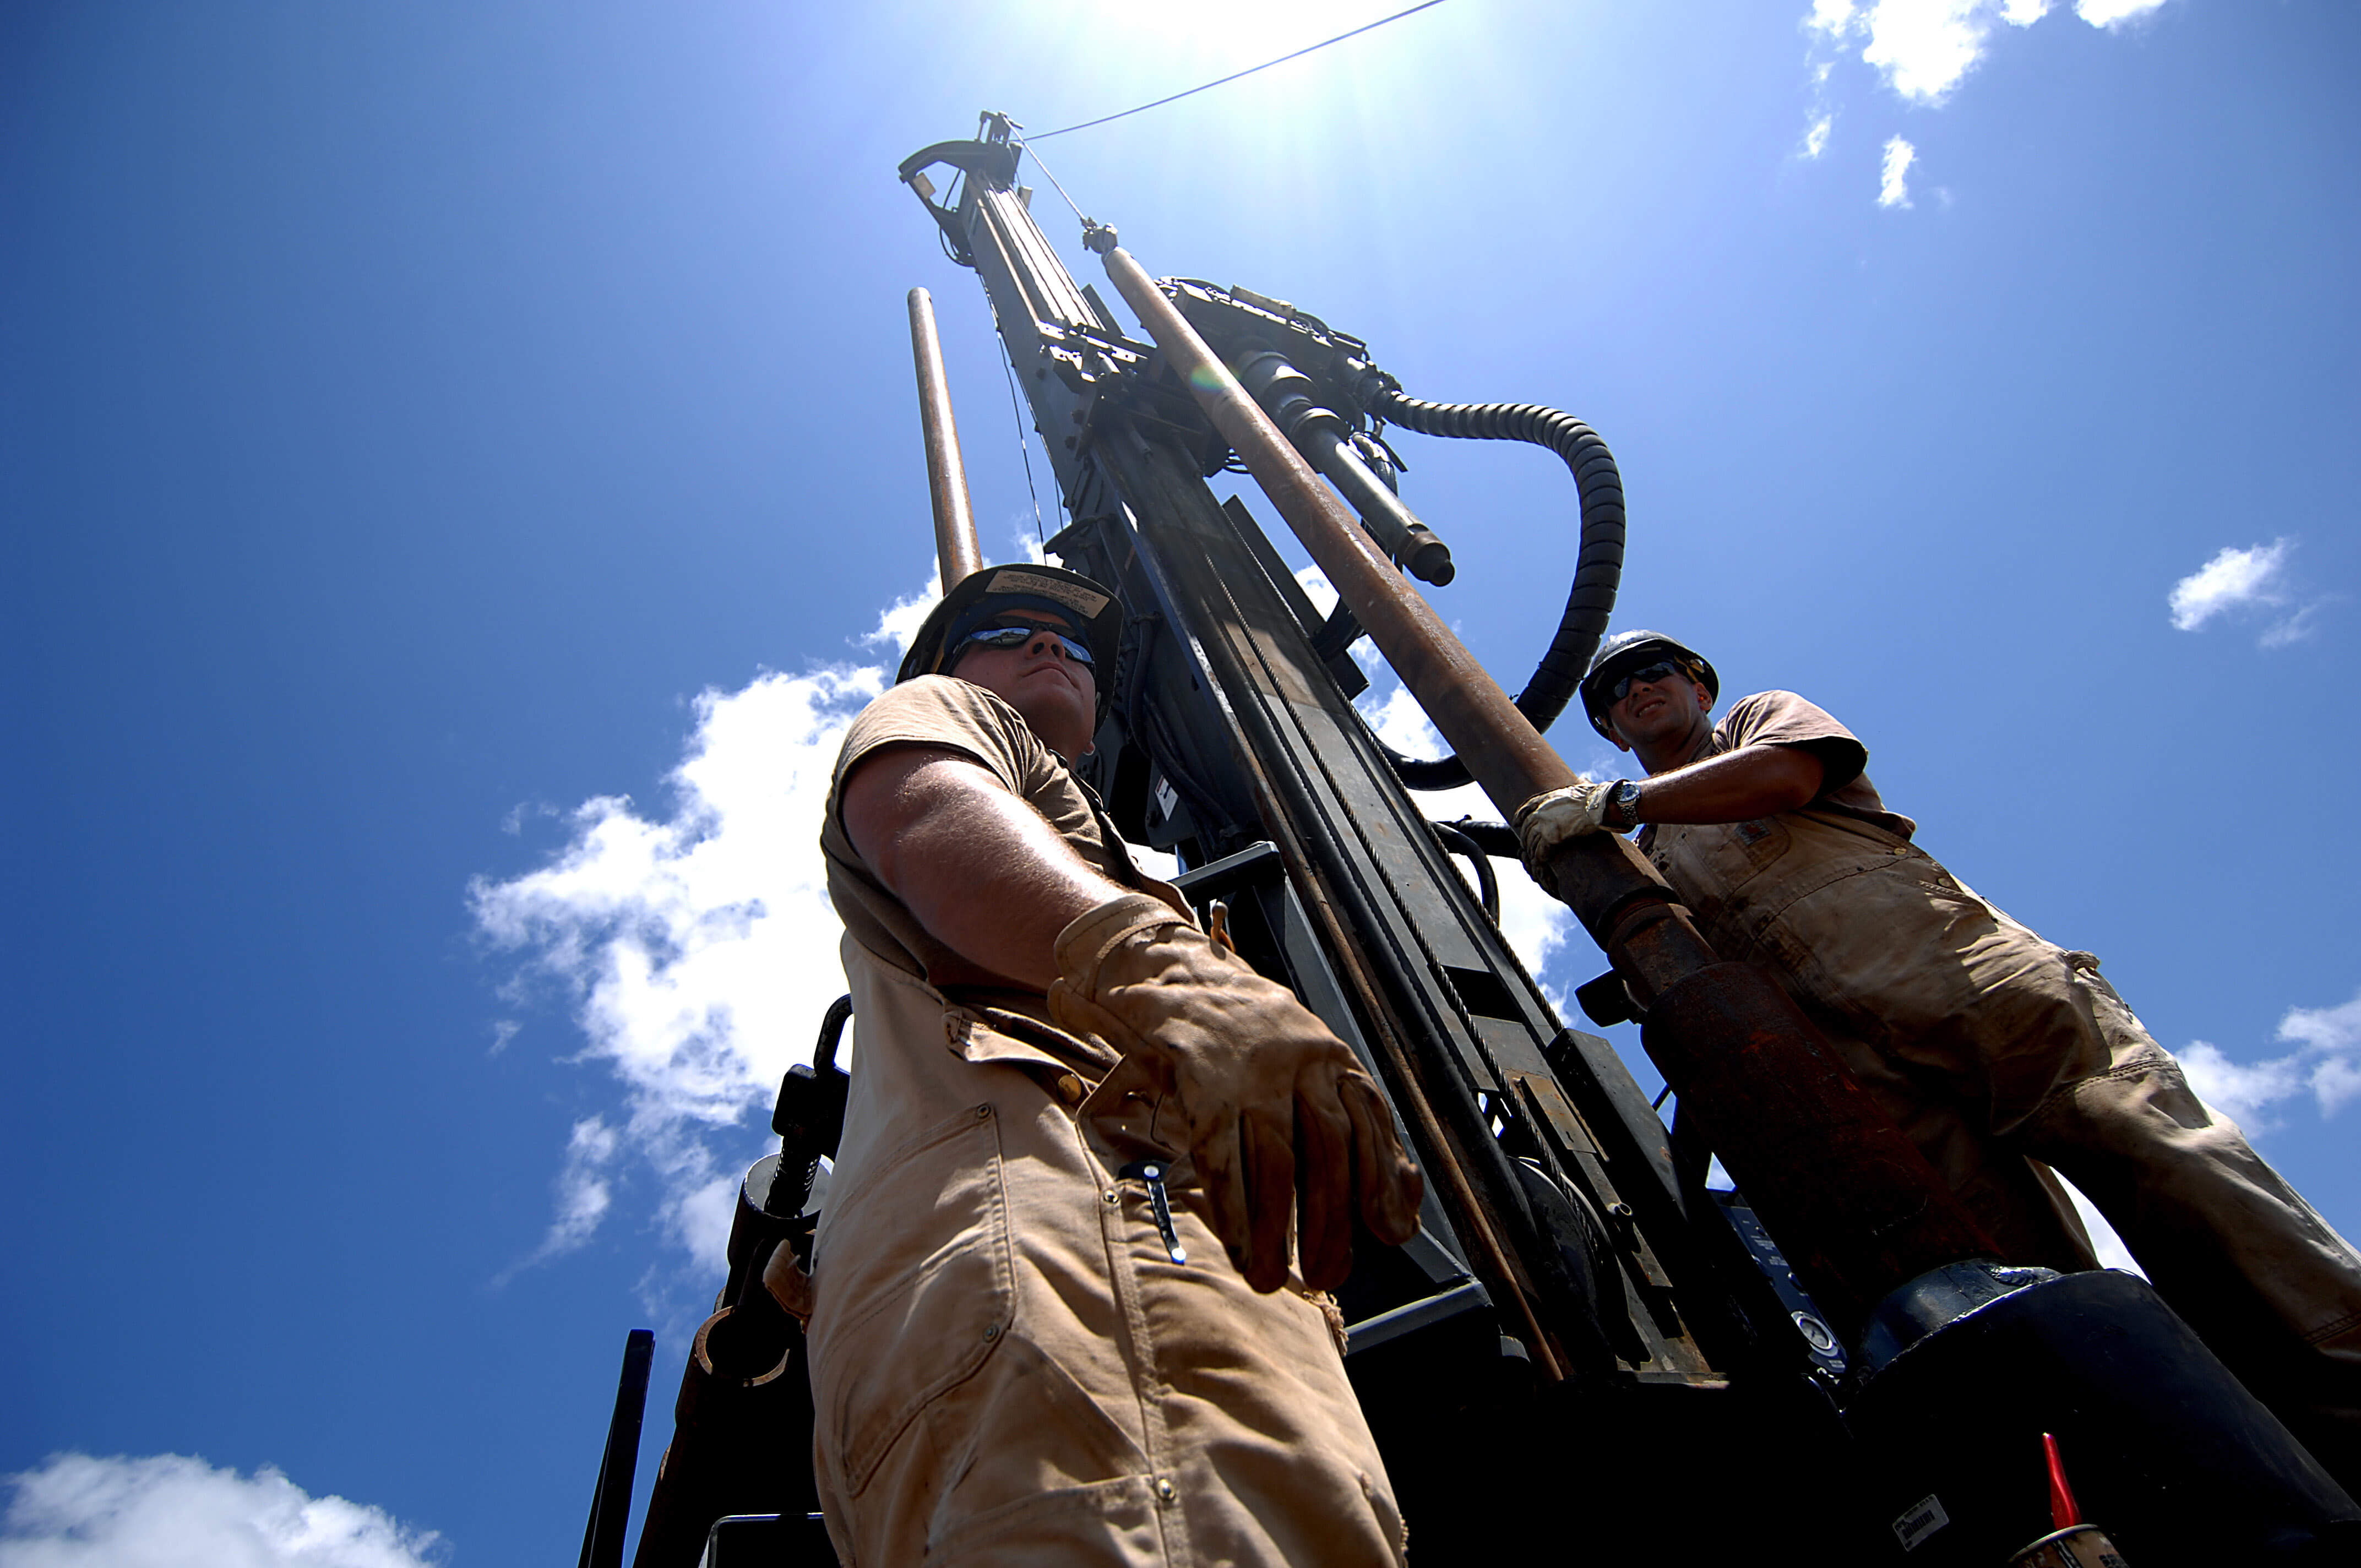 080421-F-1644L-077 U.S. Navy Equipment Operators Petty Officers 1st Class Aaron Nagel and Steven Barczak, both Seabees from Naval Mobile Construction Battalion 74, Combined Joint Task Force - Horn of Africa, assemble a rig during a well drilling project in Shaba, Kenya, on April 21, 2008. The well drilling project was the first of three Seabees conducted in the area. DoD photo by Tech. Sgt. Jeremy T. Lock, U.S. Air Force. (Released)